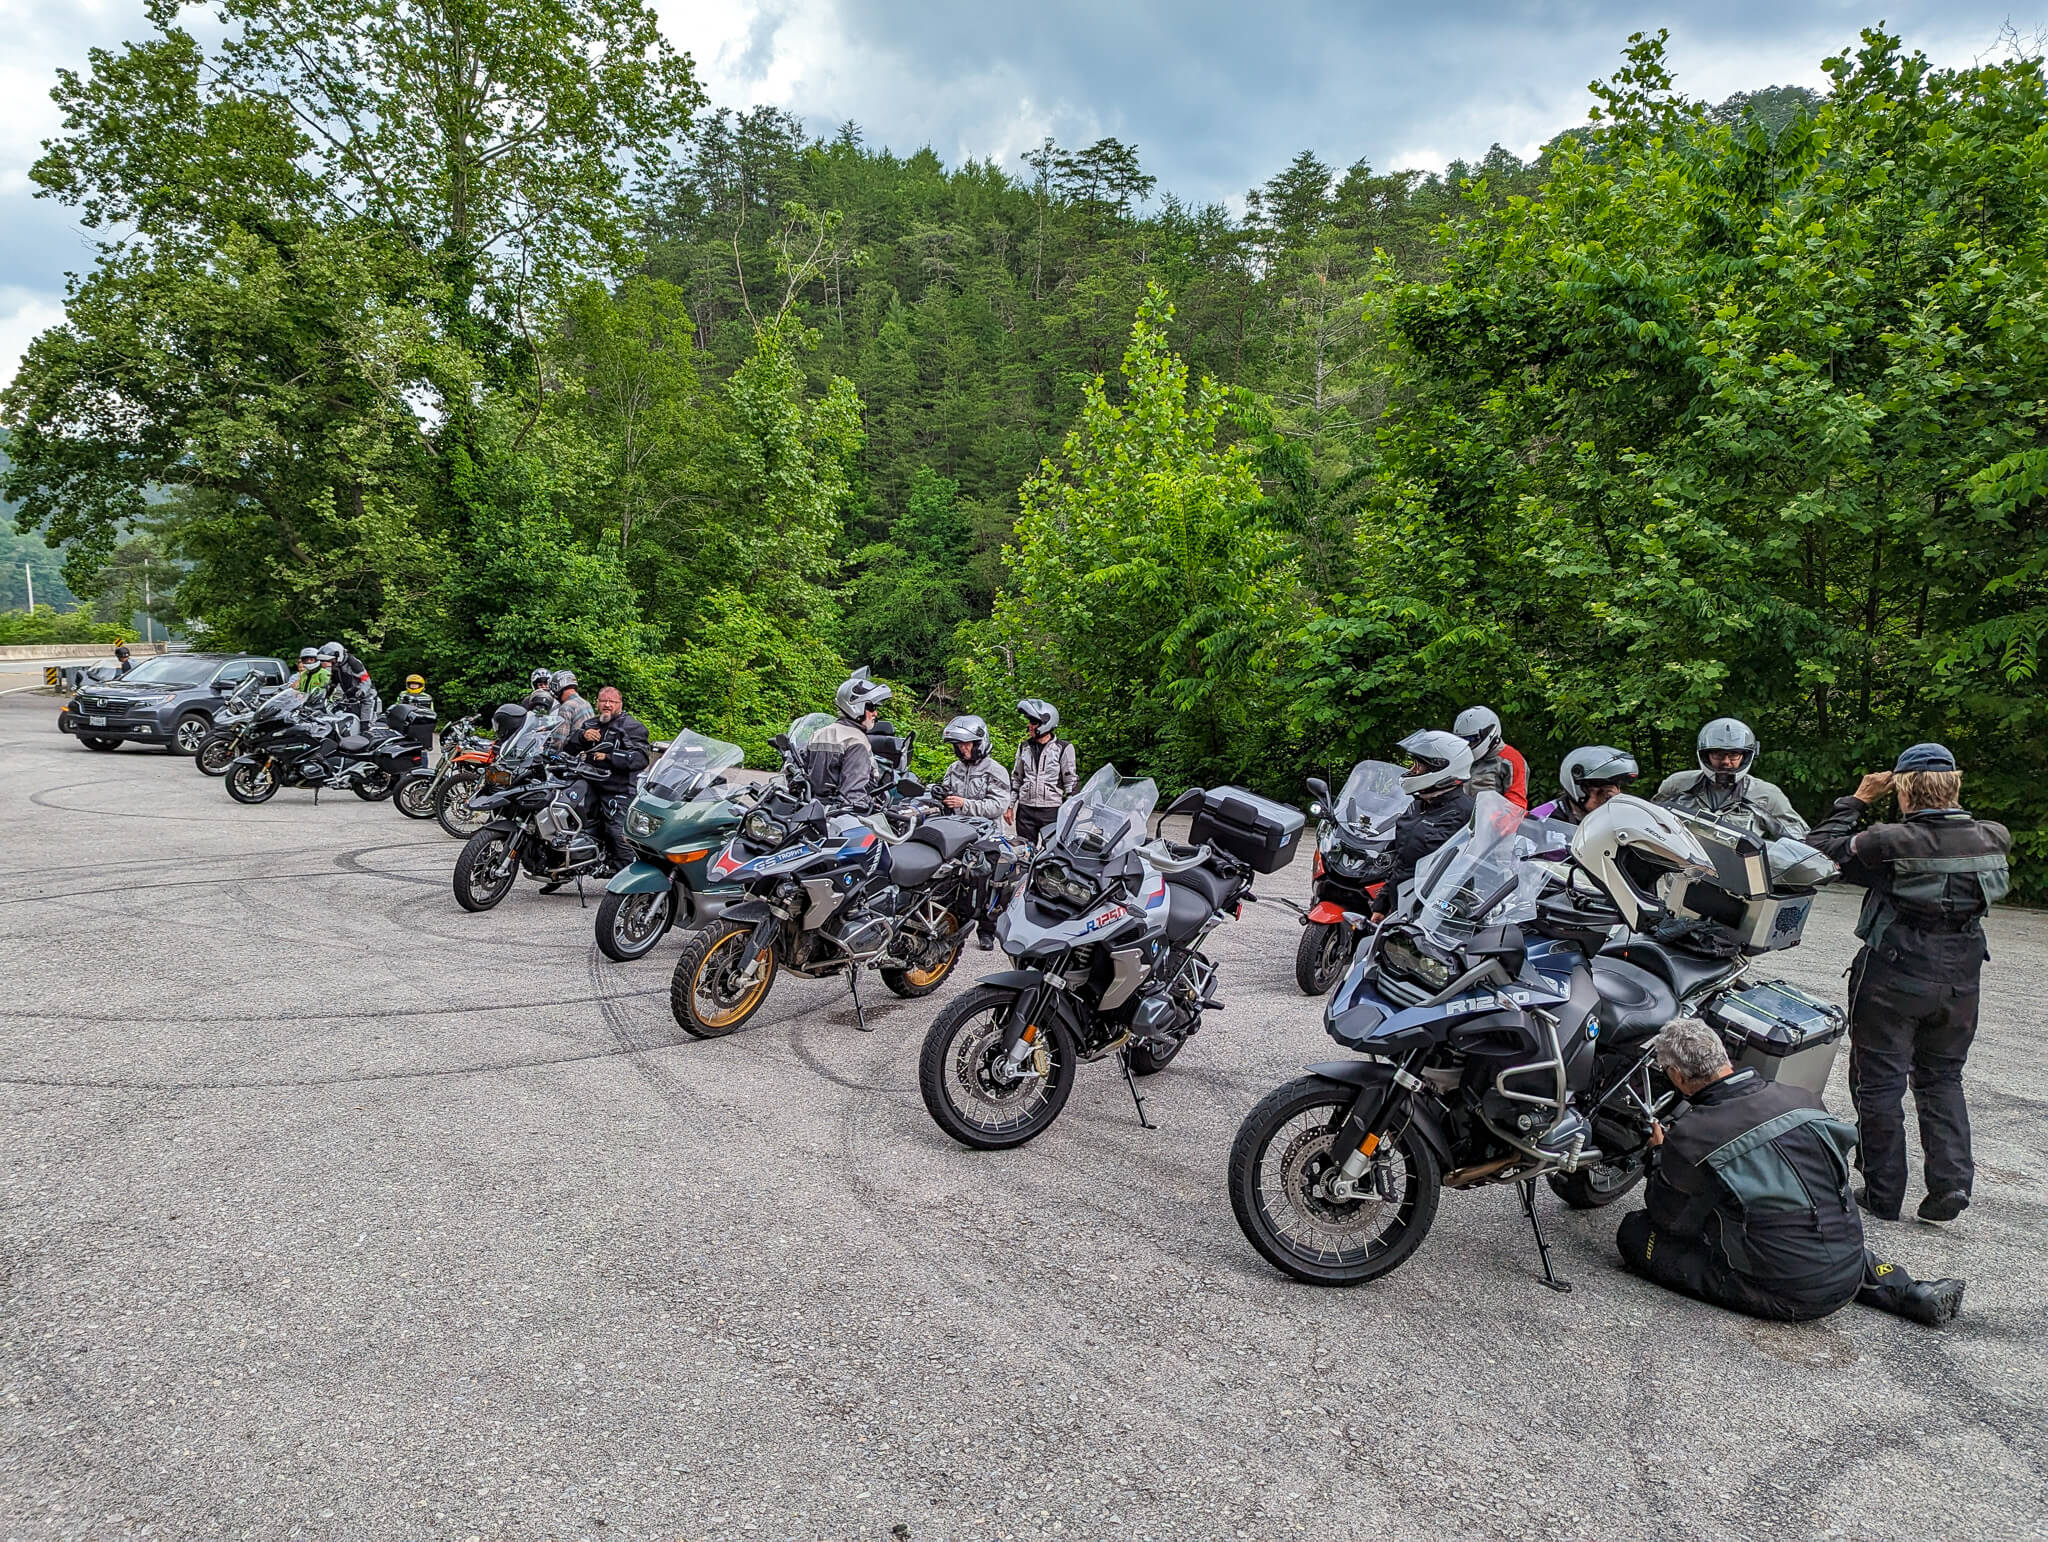 Row of BMW adventure bikes with riders in gear